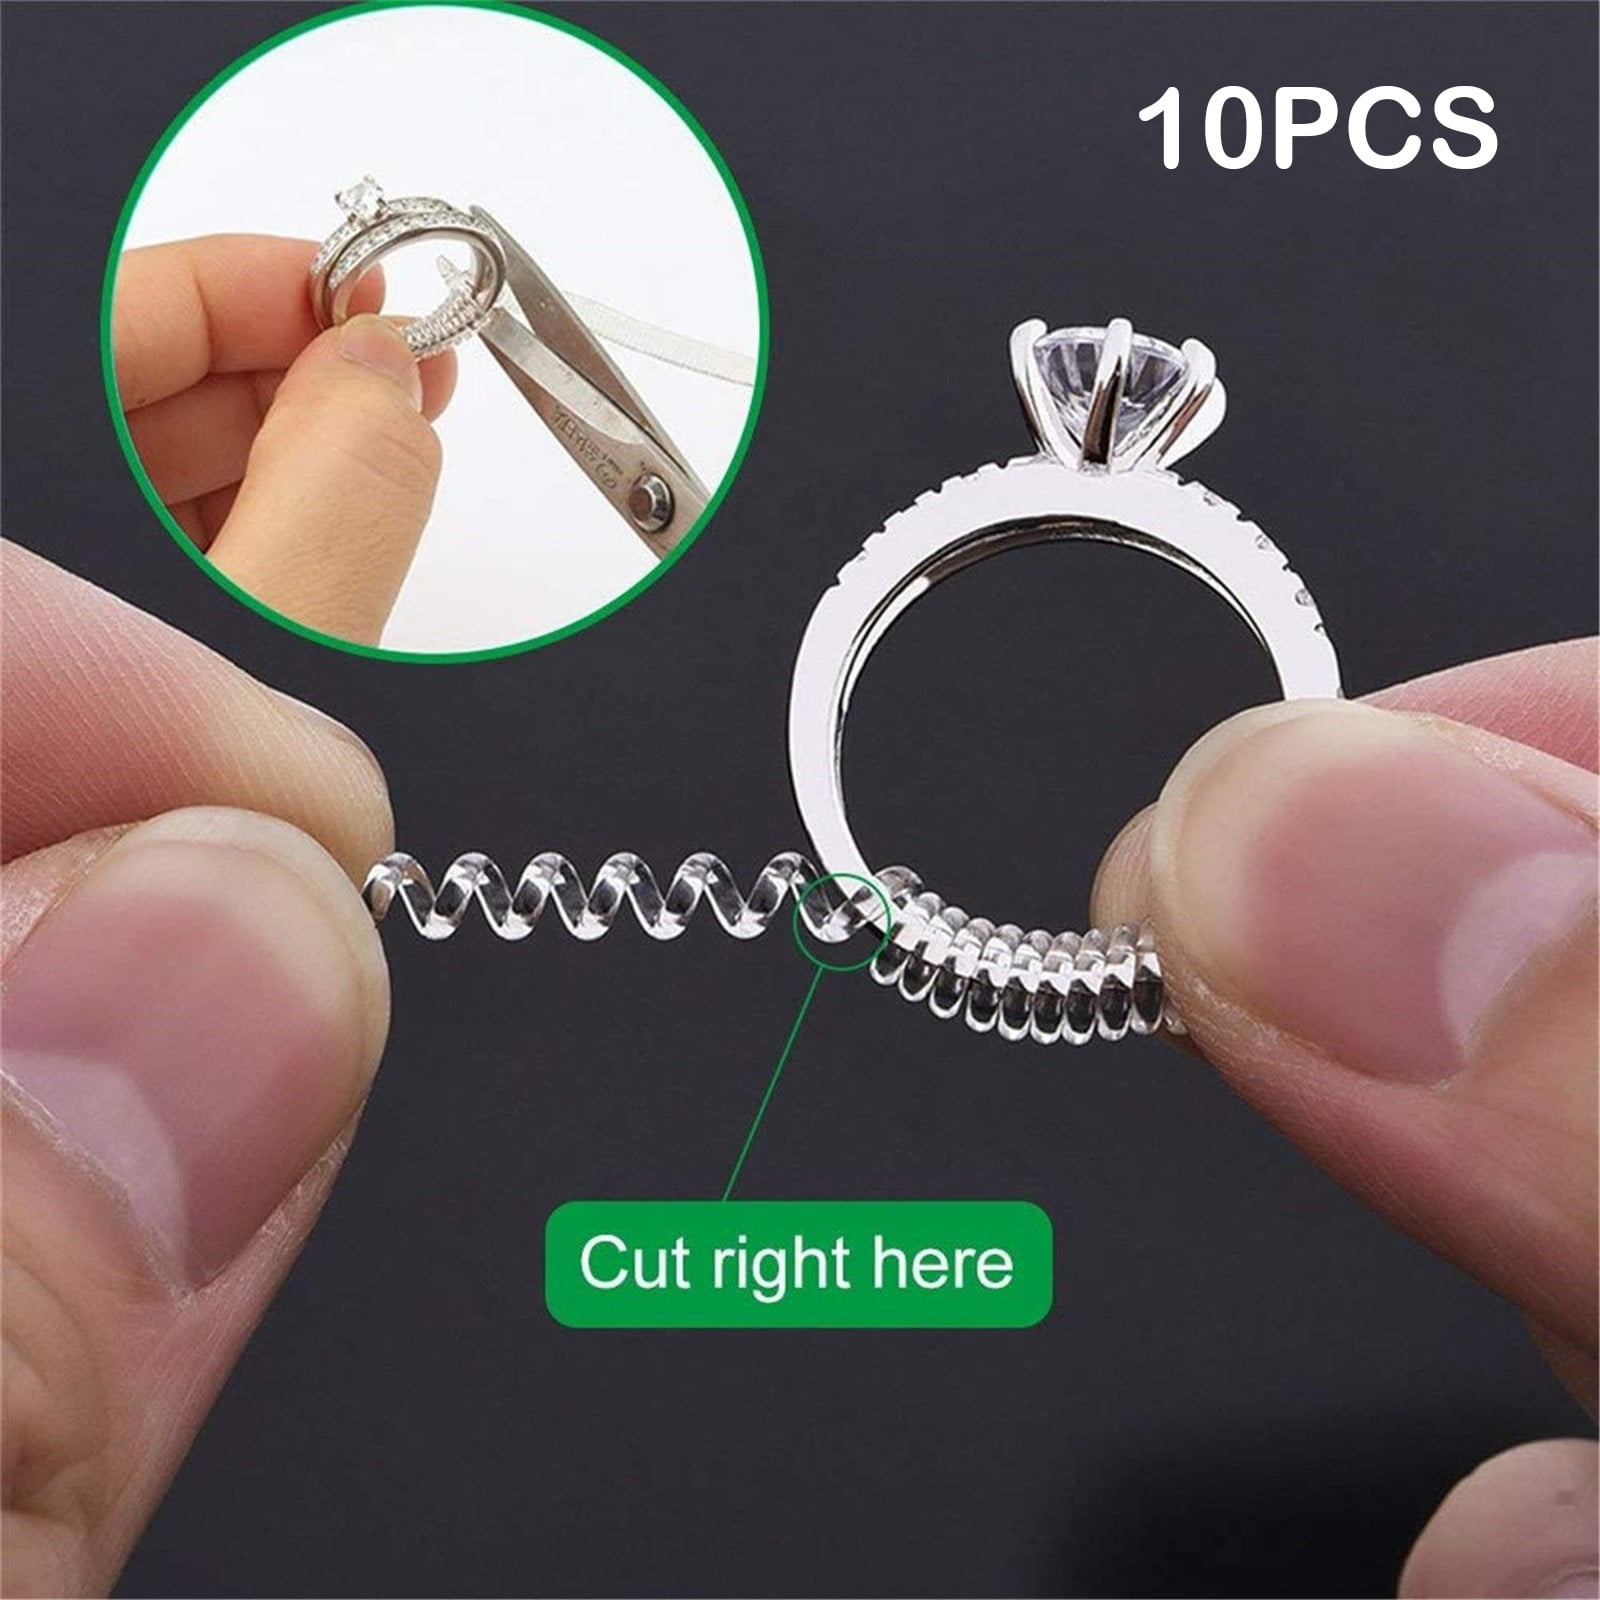 Herrnalise Invisible Ring Size Adjuster for Loose Rings Ring Adjuster Fit  Any Rings, Assorted Sizes of Ring Sizer for Loose Rings (10PCS) 